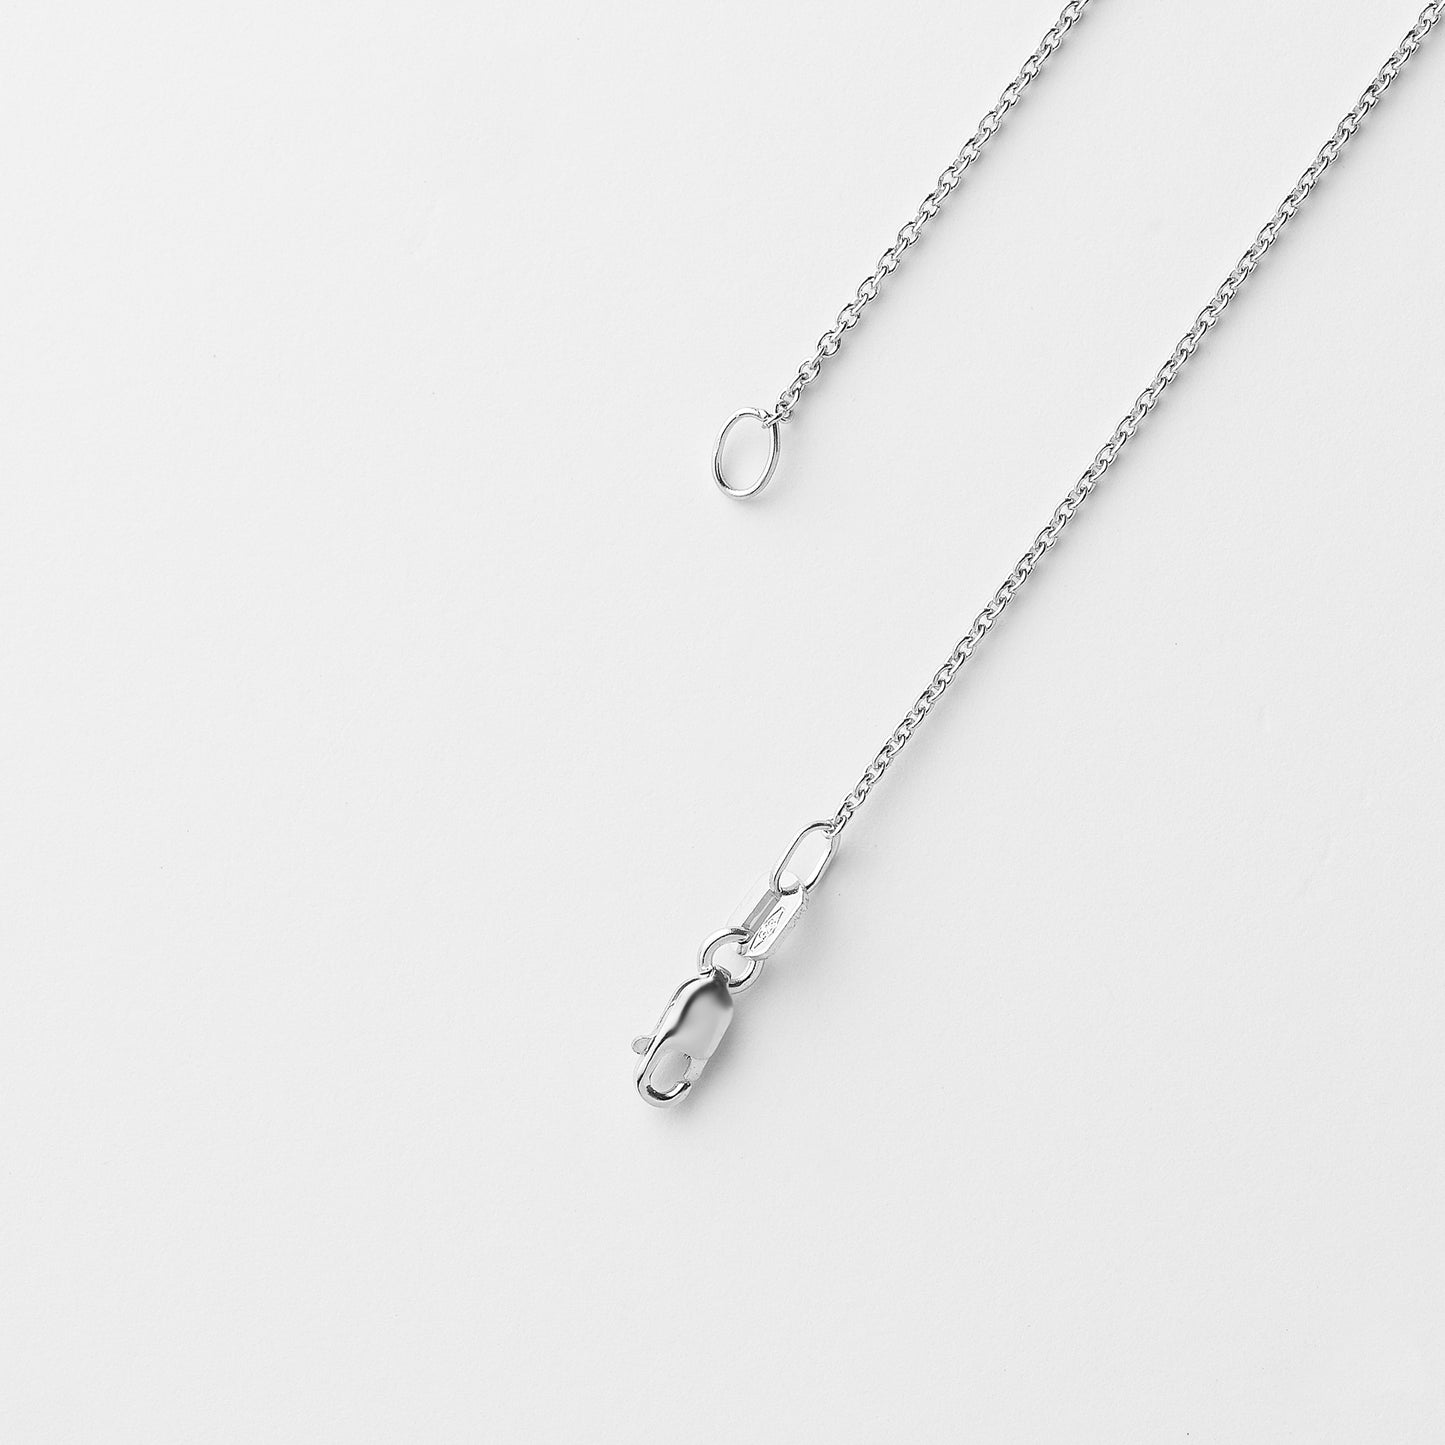 9K White Gold Cable Chain